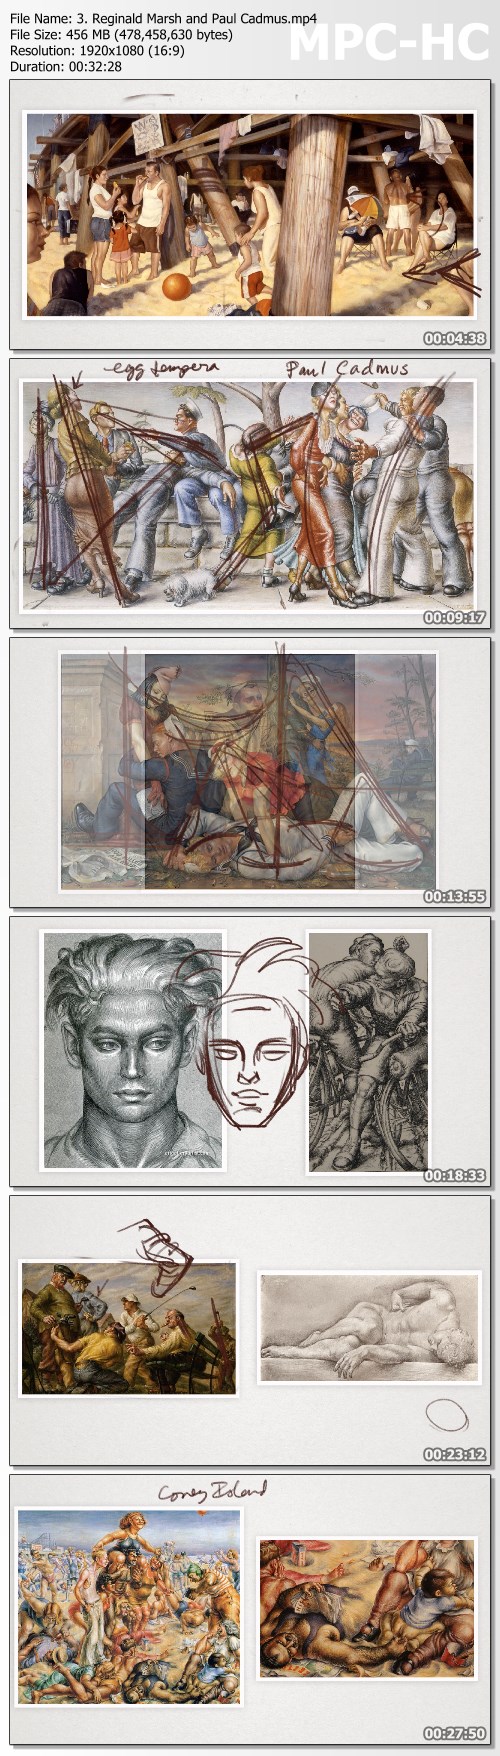 New Masters Academy - Drawing Lessons from Art History With Danny Galieote